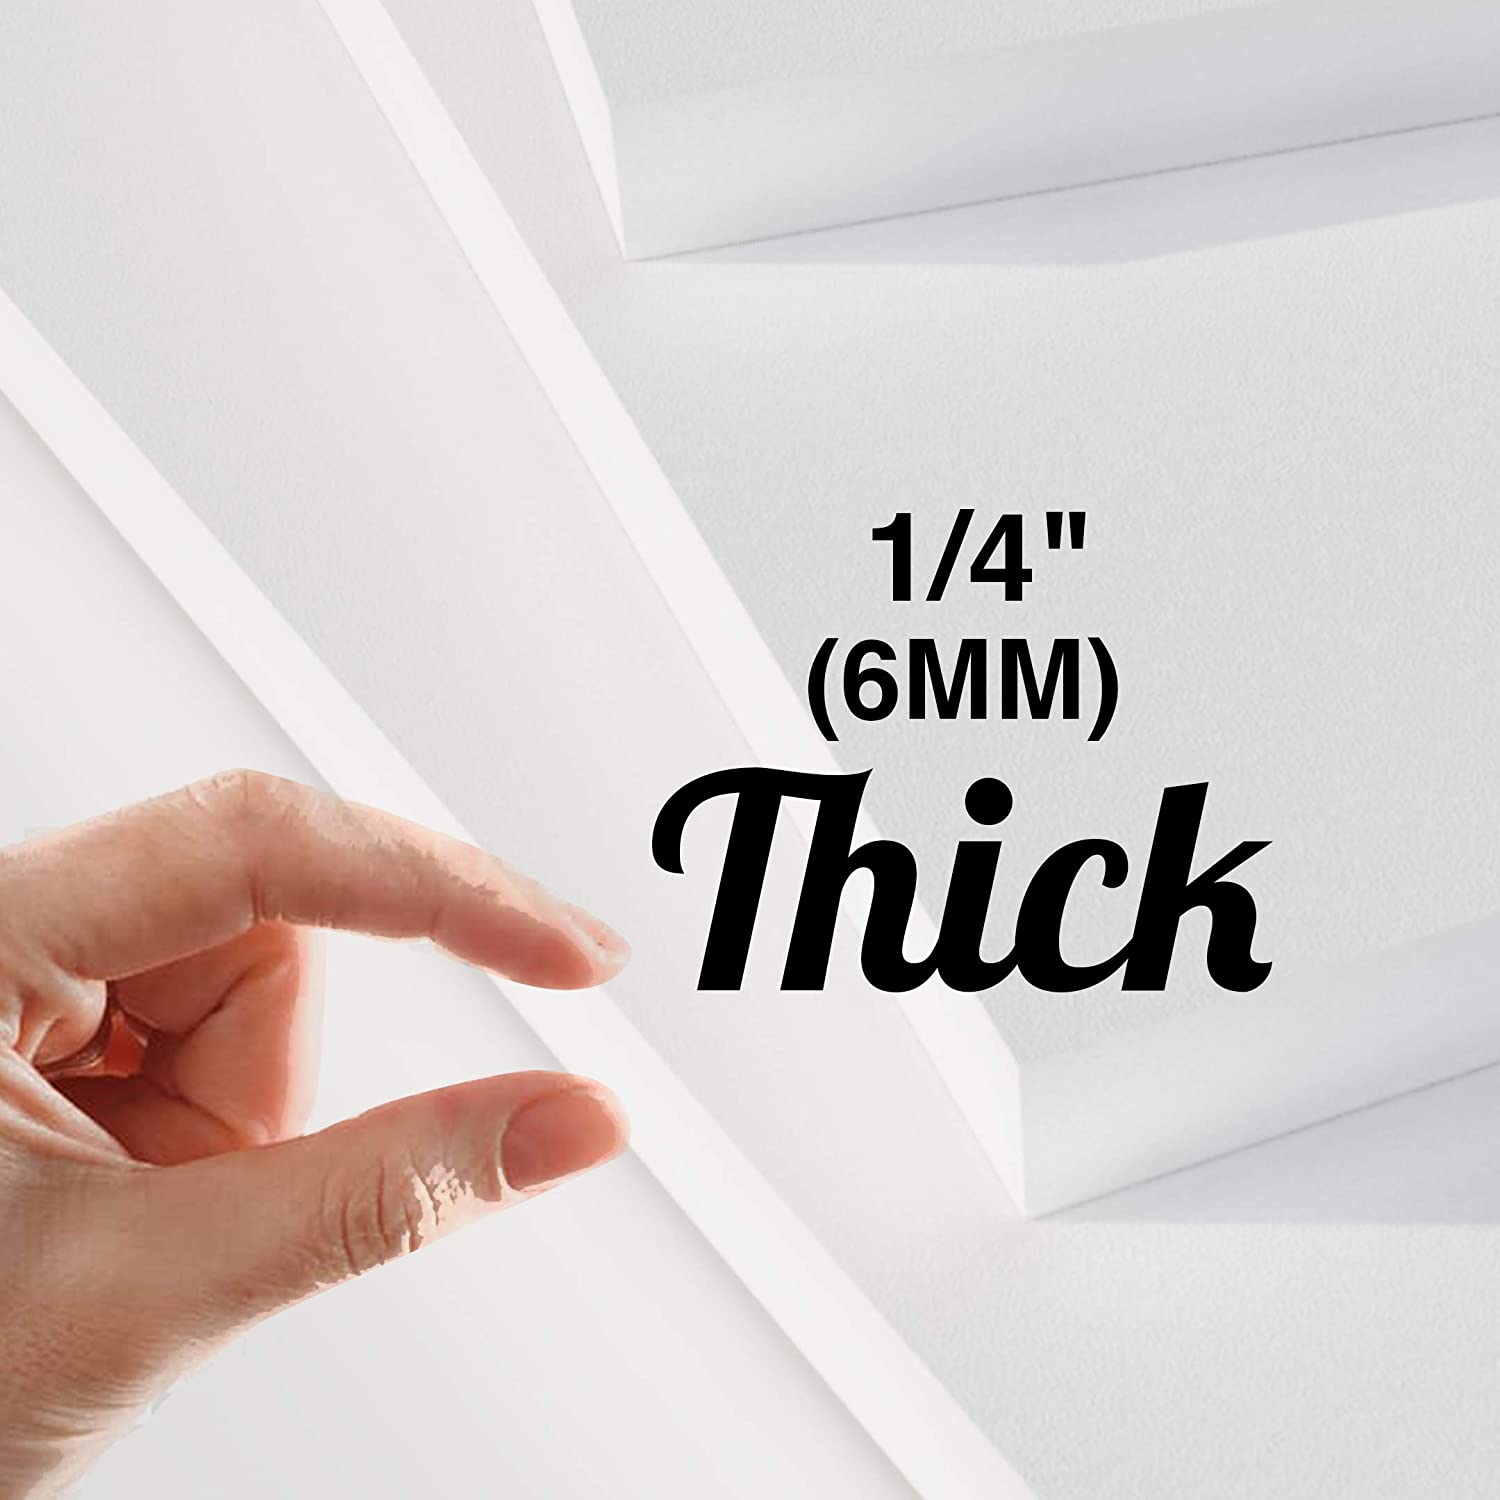 Expanded PVC Sheet - Lightweight Rigid Foam - 6mm (1/4 inch) - 12 x 12 inches - White - Ideal for Signage, Displays, and Digital/Screen Printing